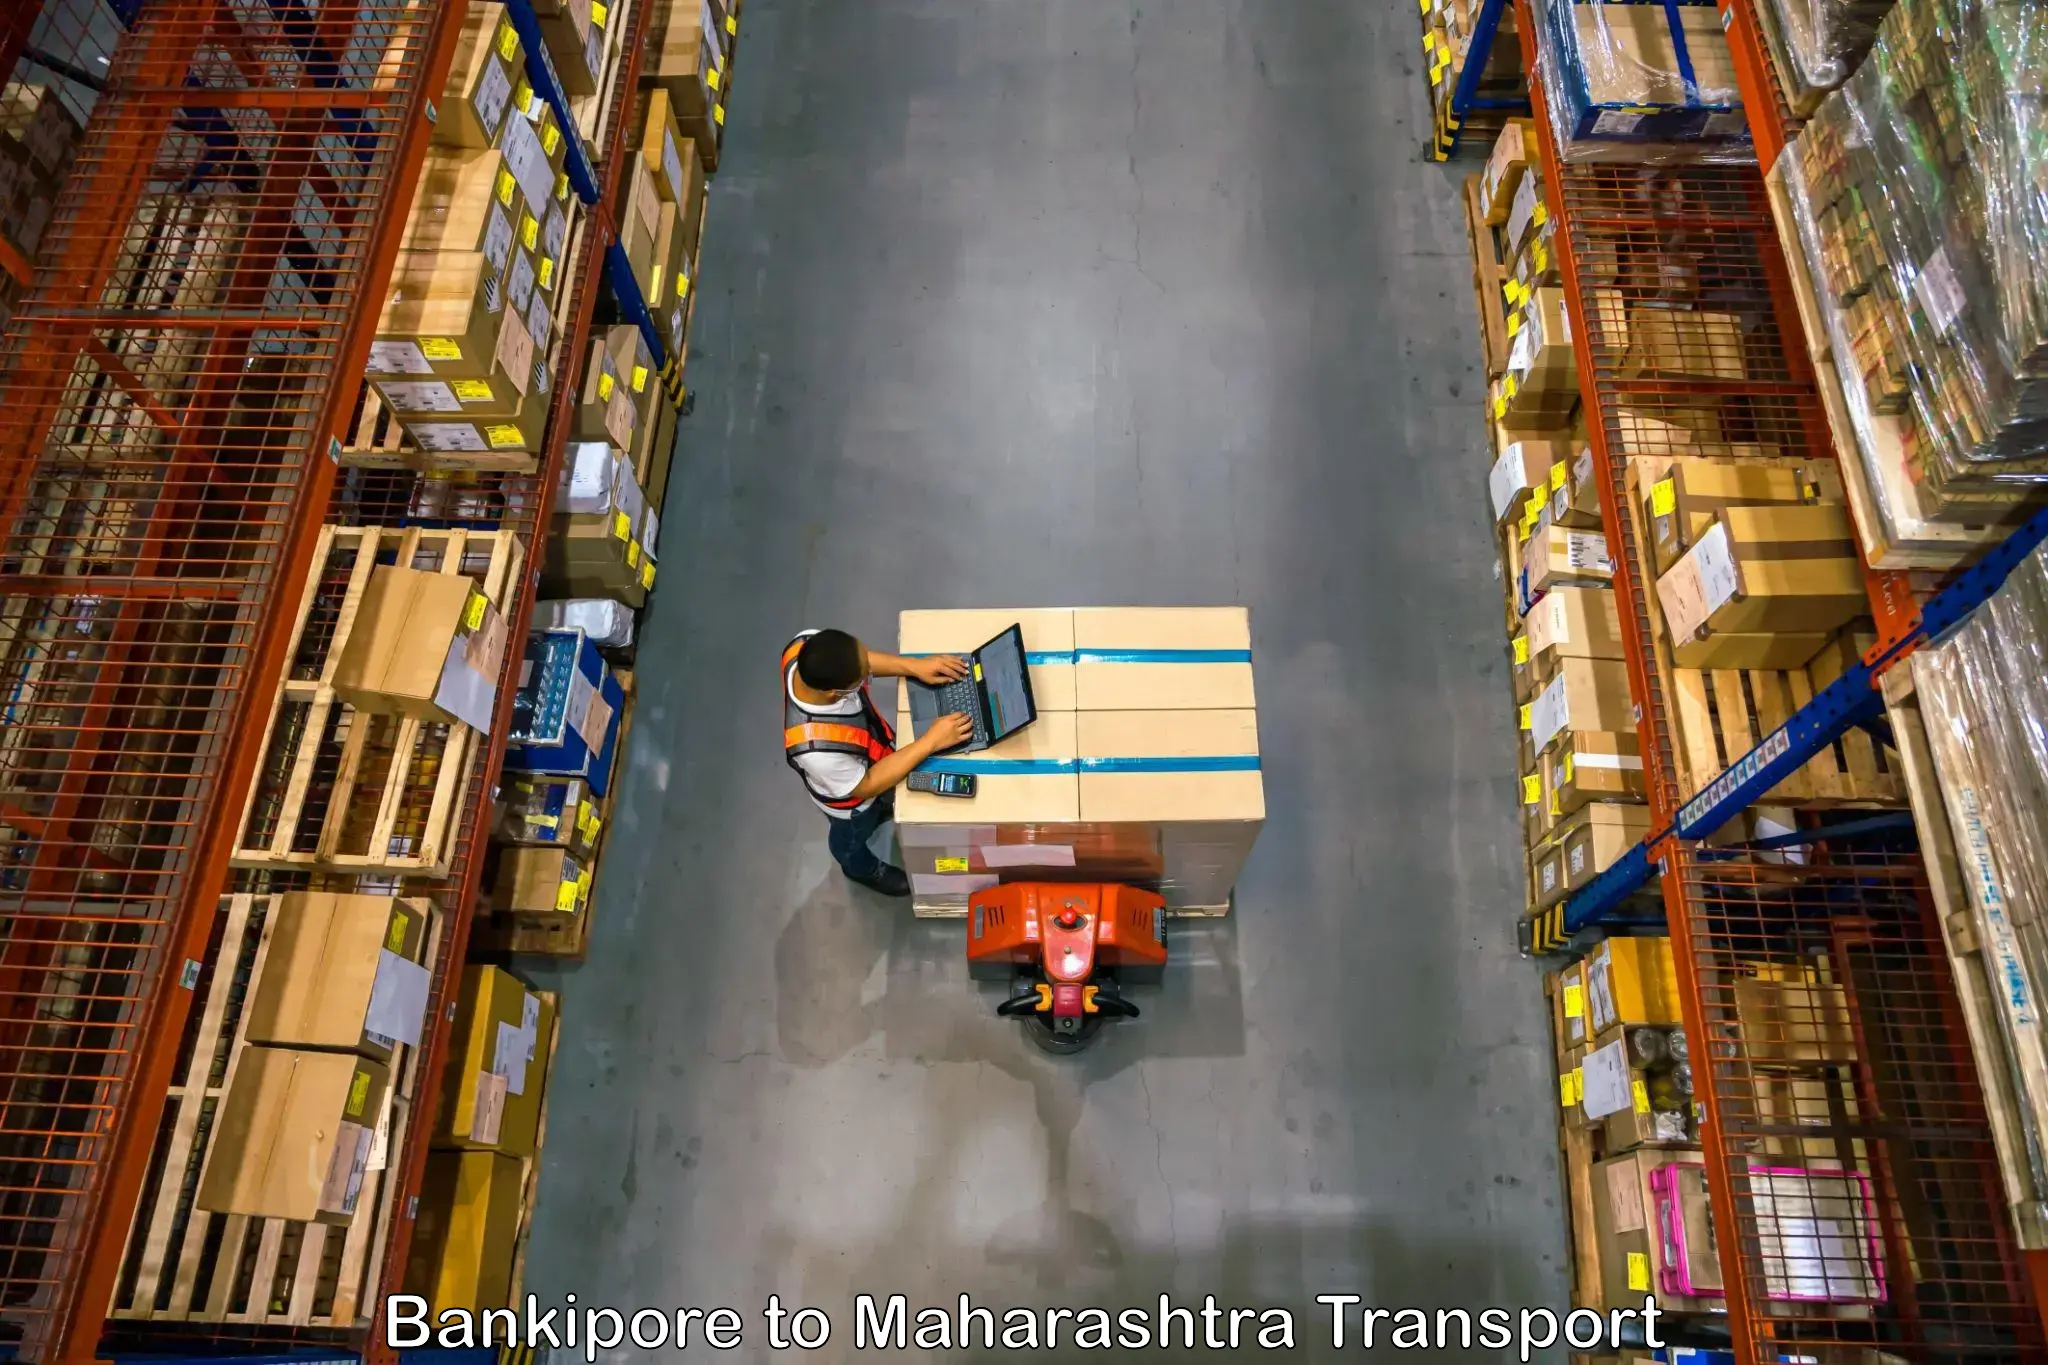 Material transport services Bankipore to Lonavala